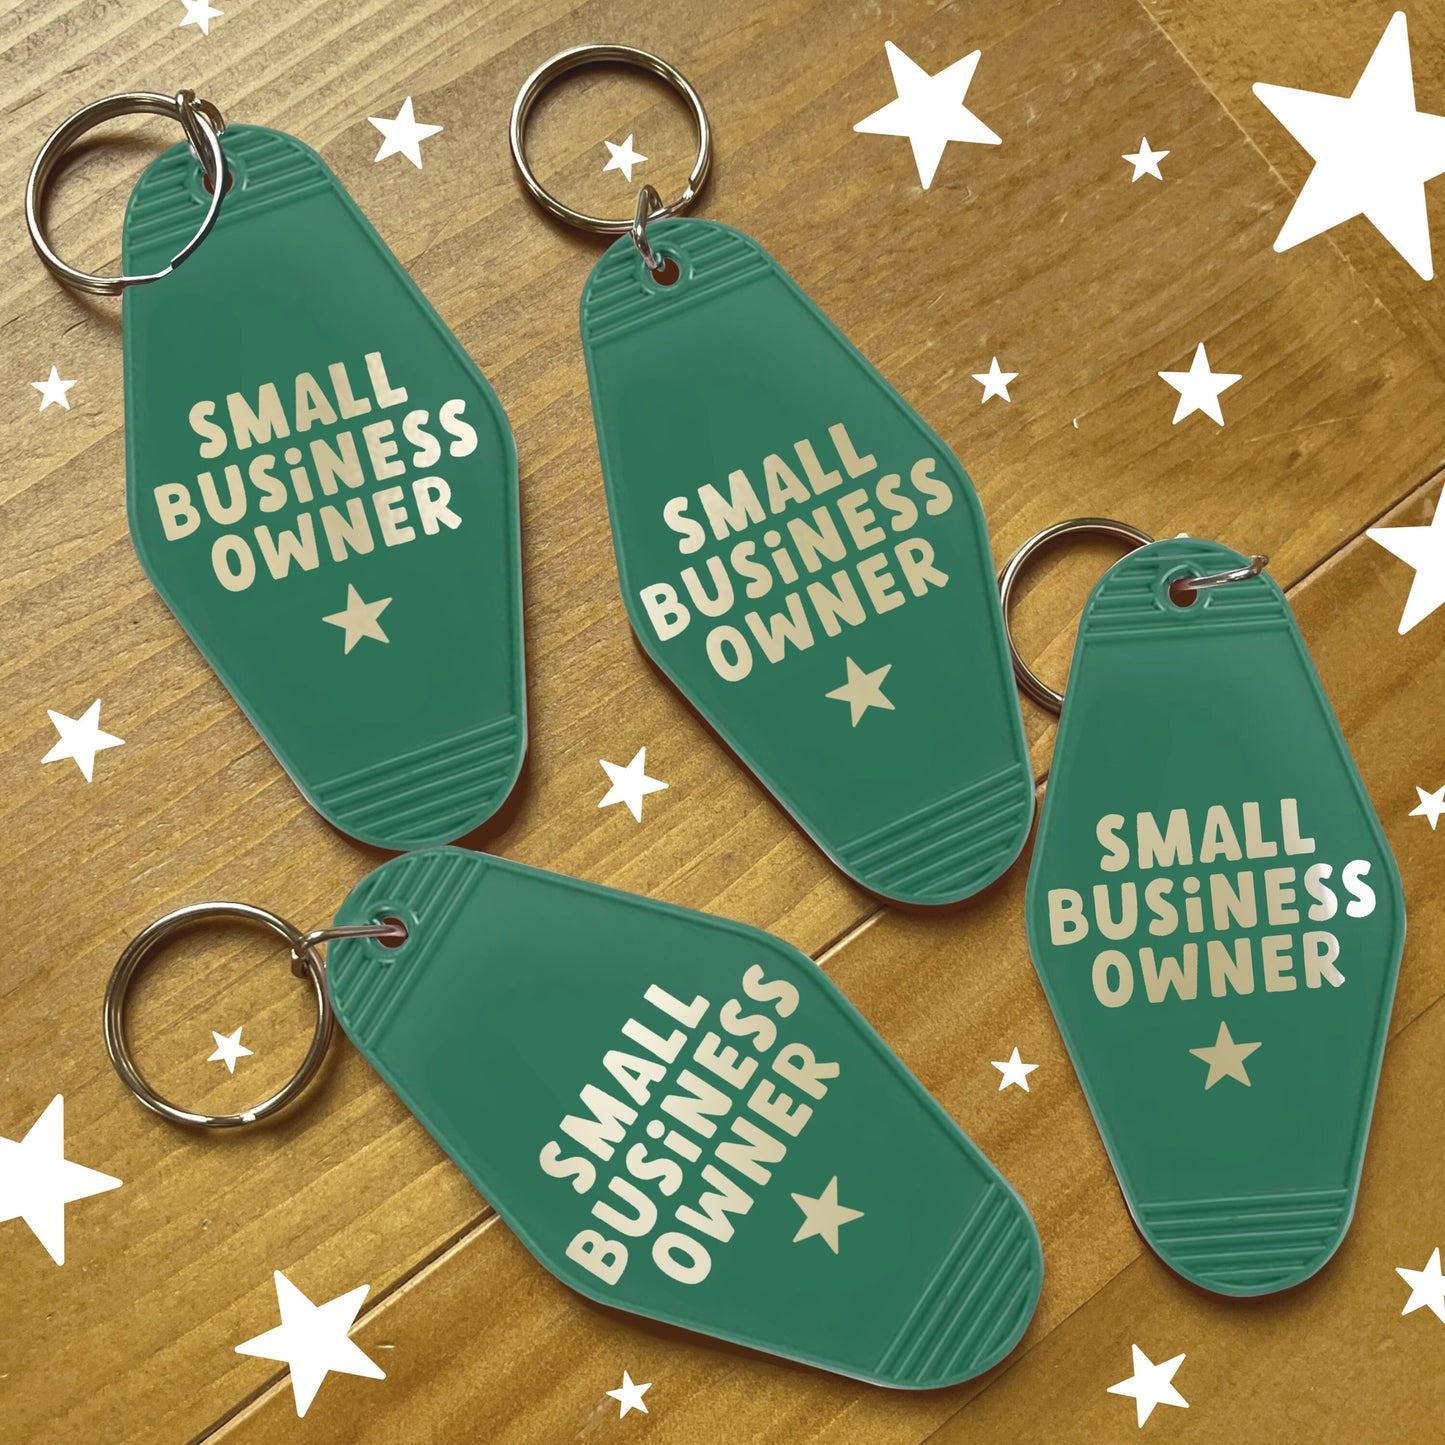 Small Business Owner Keychain | Green Motel Style Keychains, Small Business Owner Gifts, Small Business